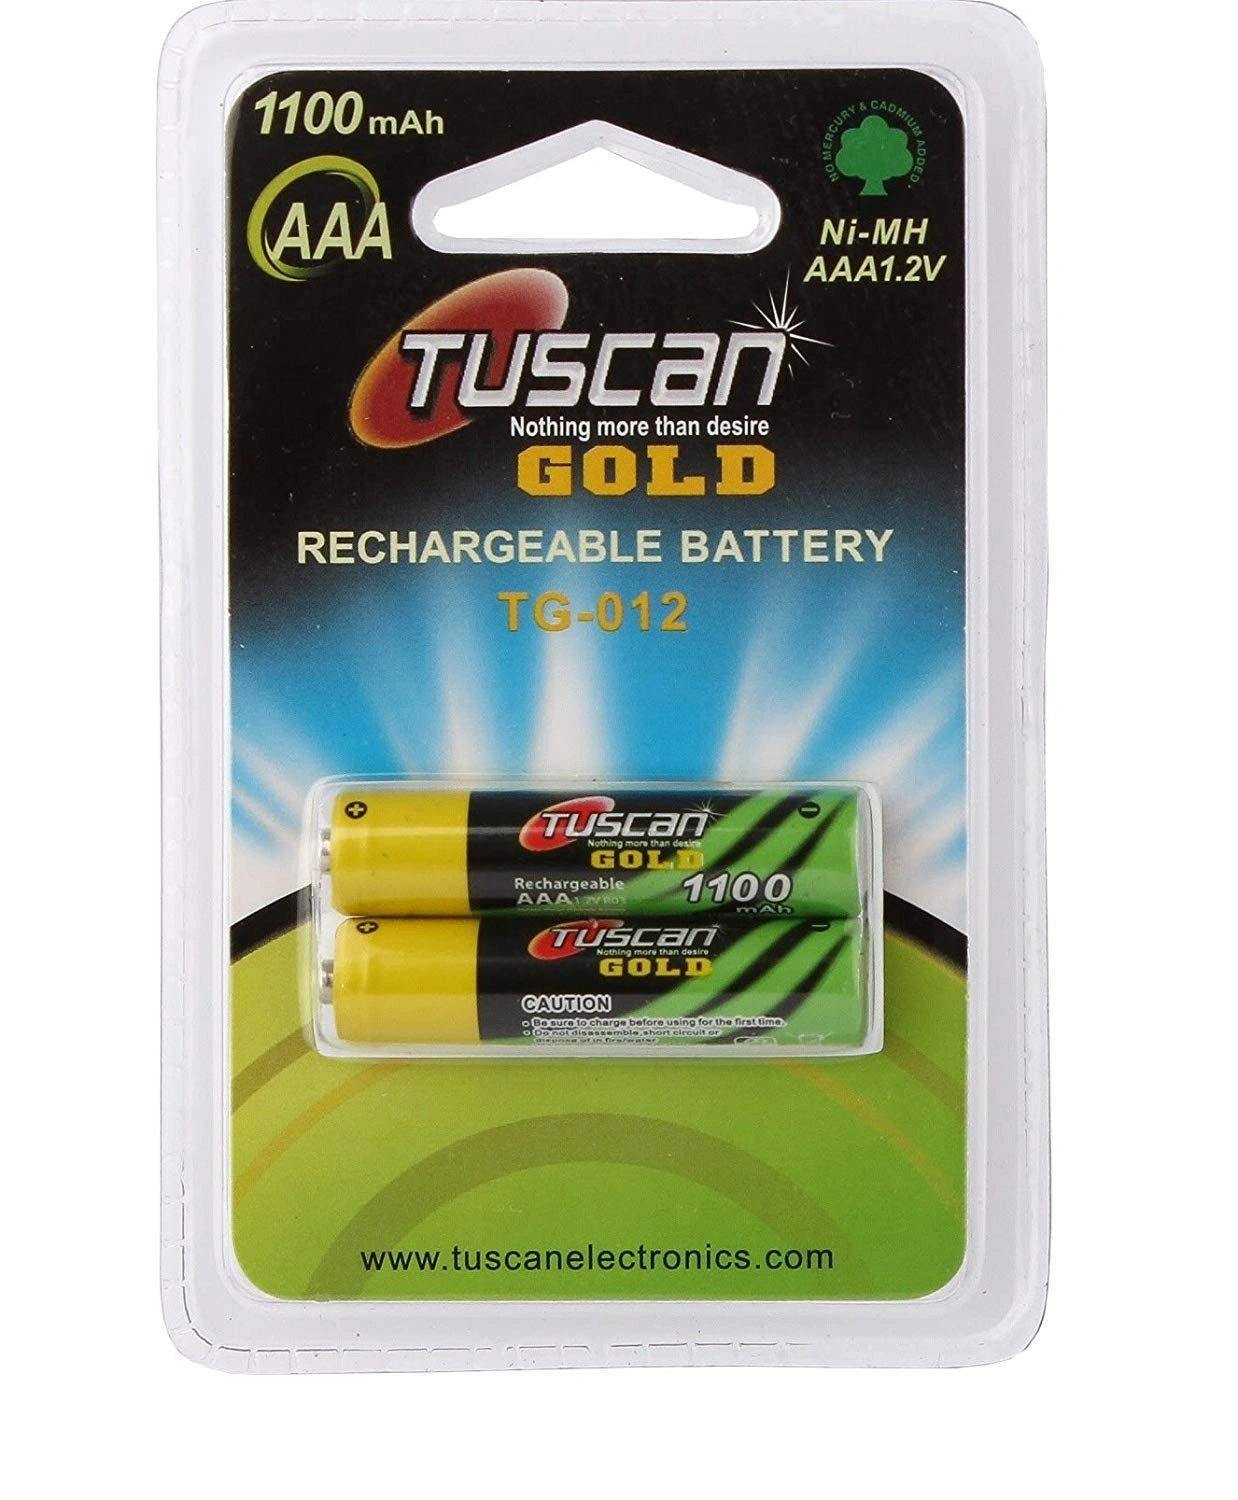 Tuscan Gold AAA 1100 mAh Rechargeable Battery (2 pcs)-Rechargeable Batteries-dealsplant